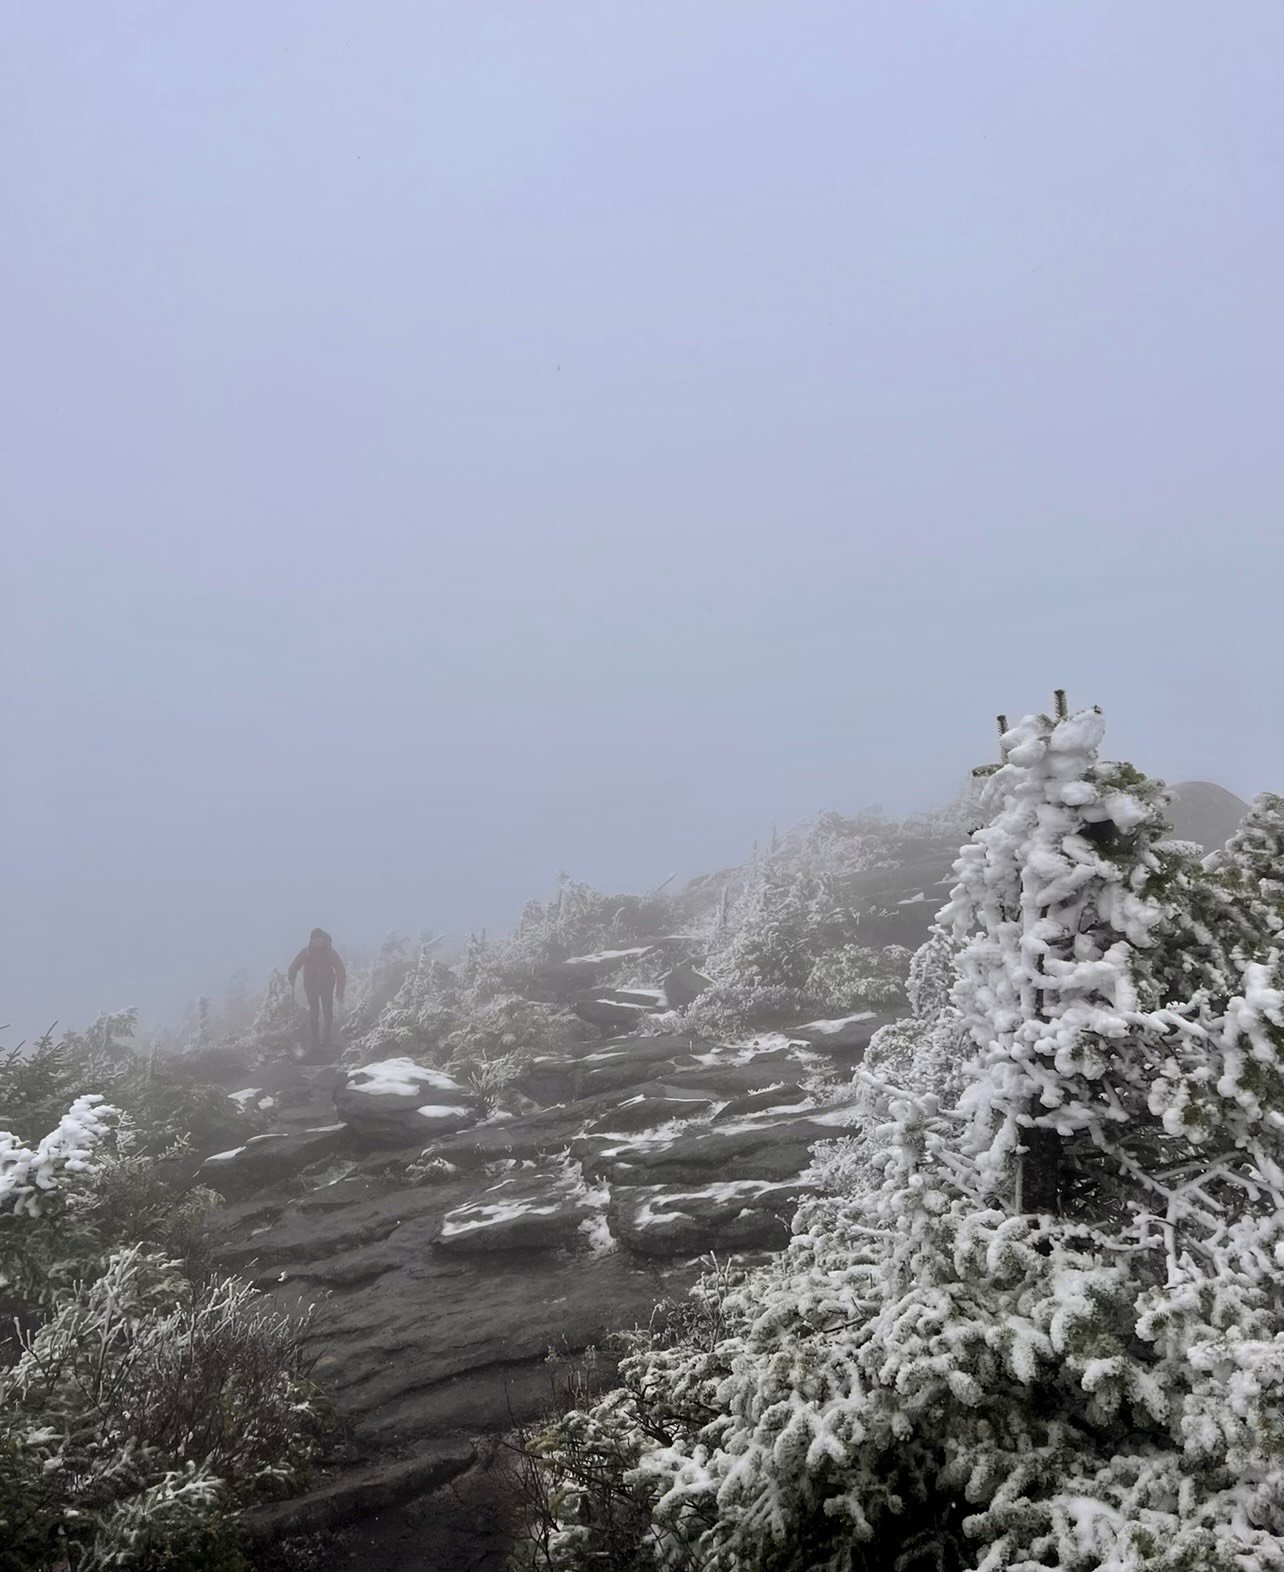 October on Whiteface by Erin Merenich